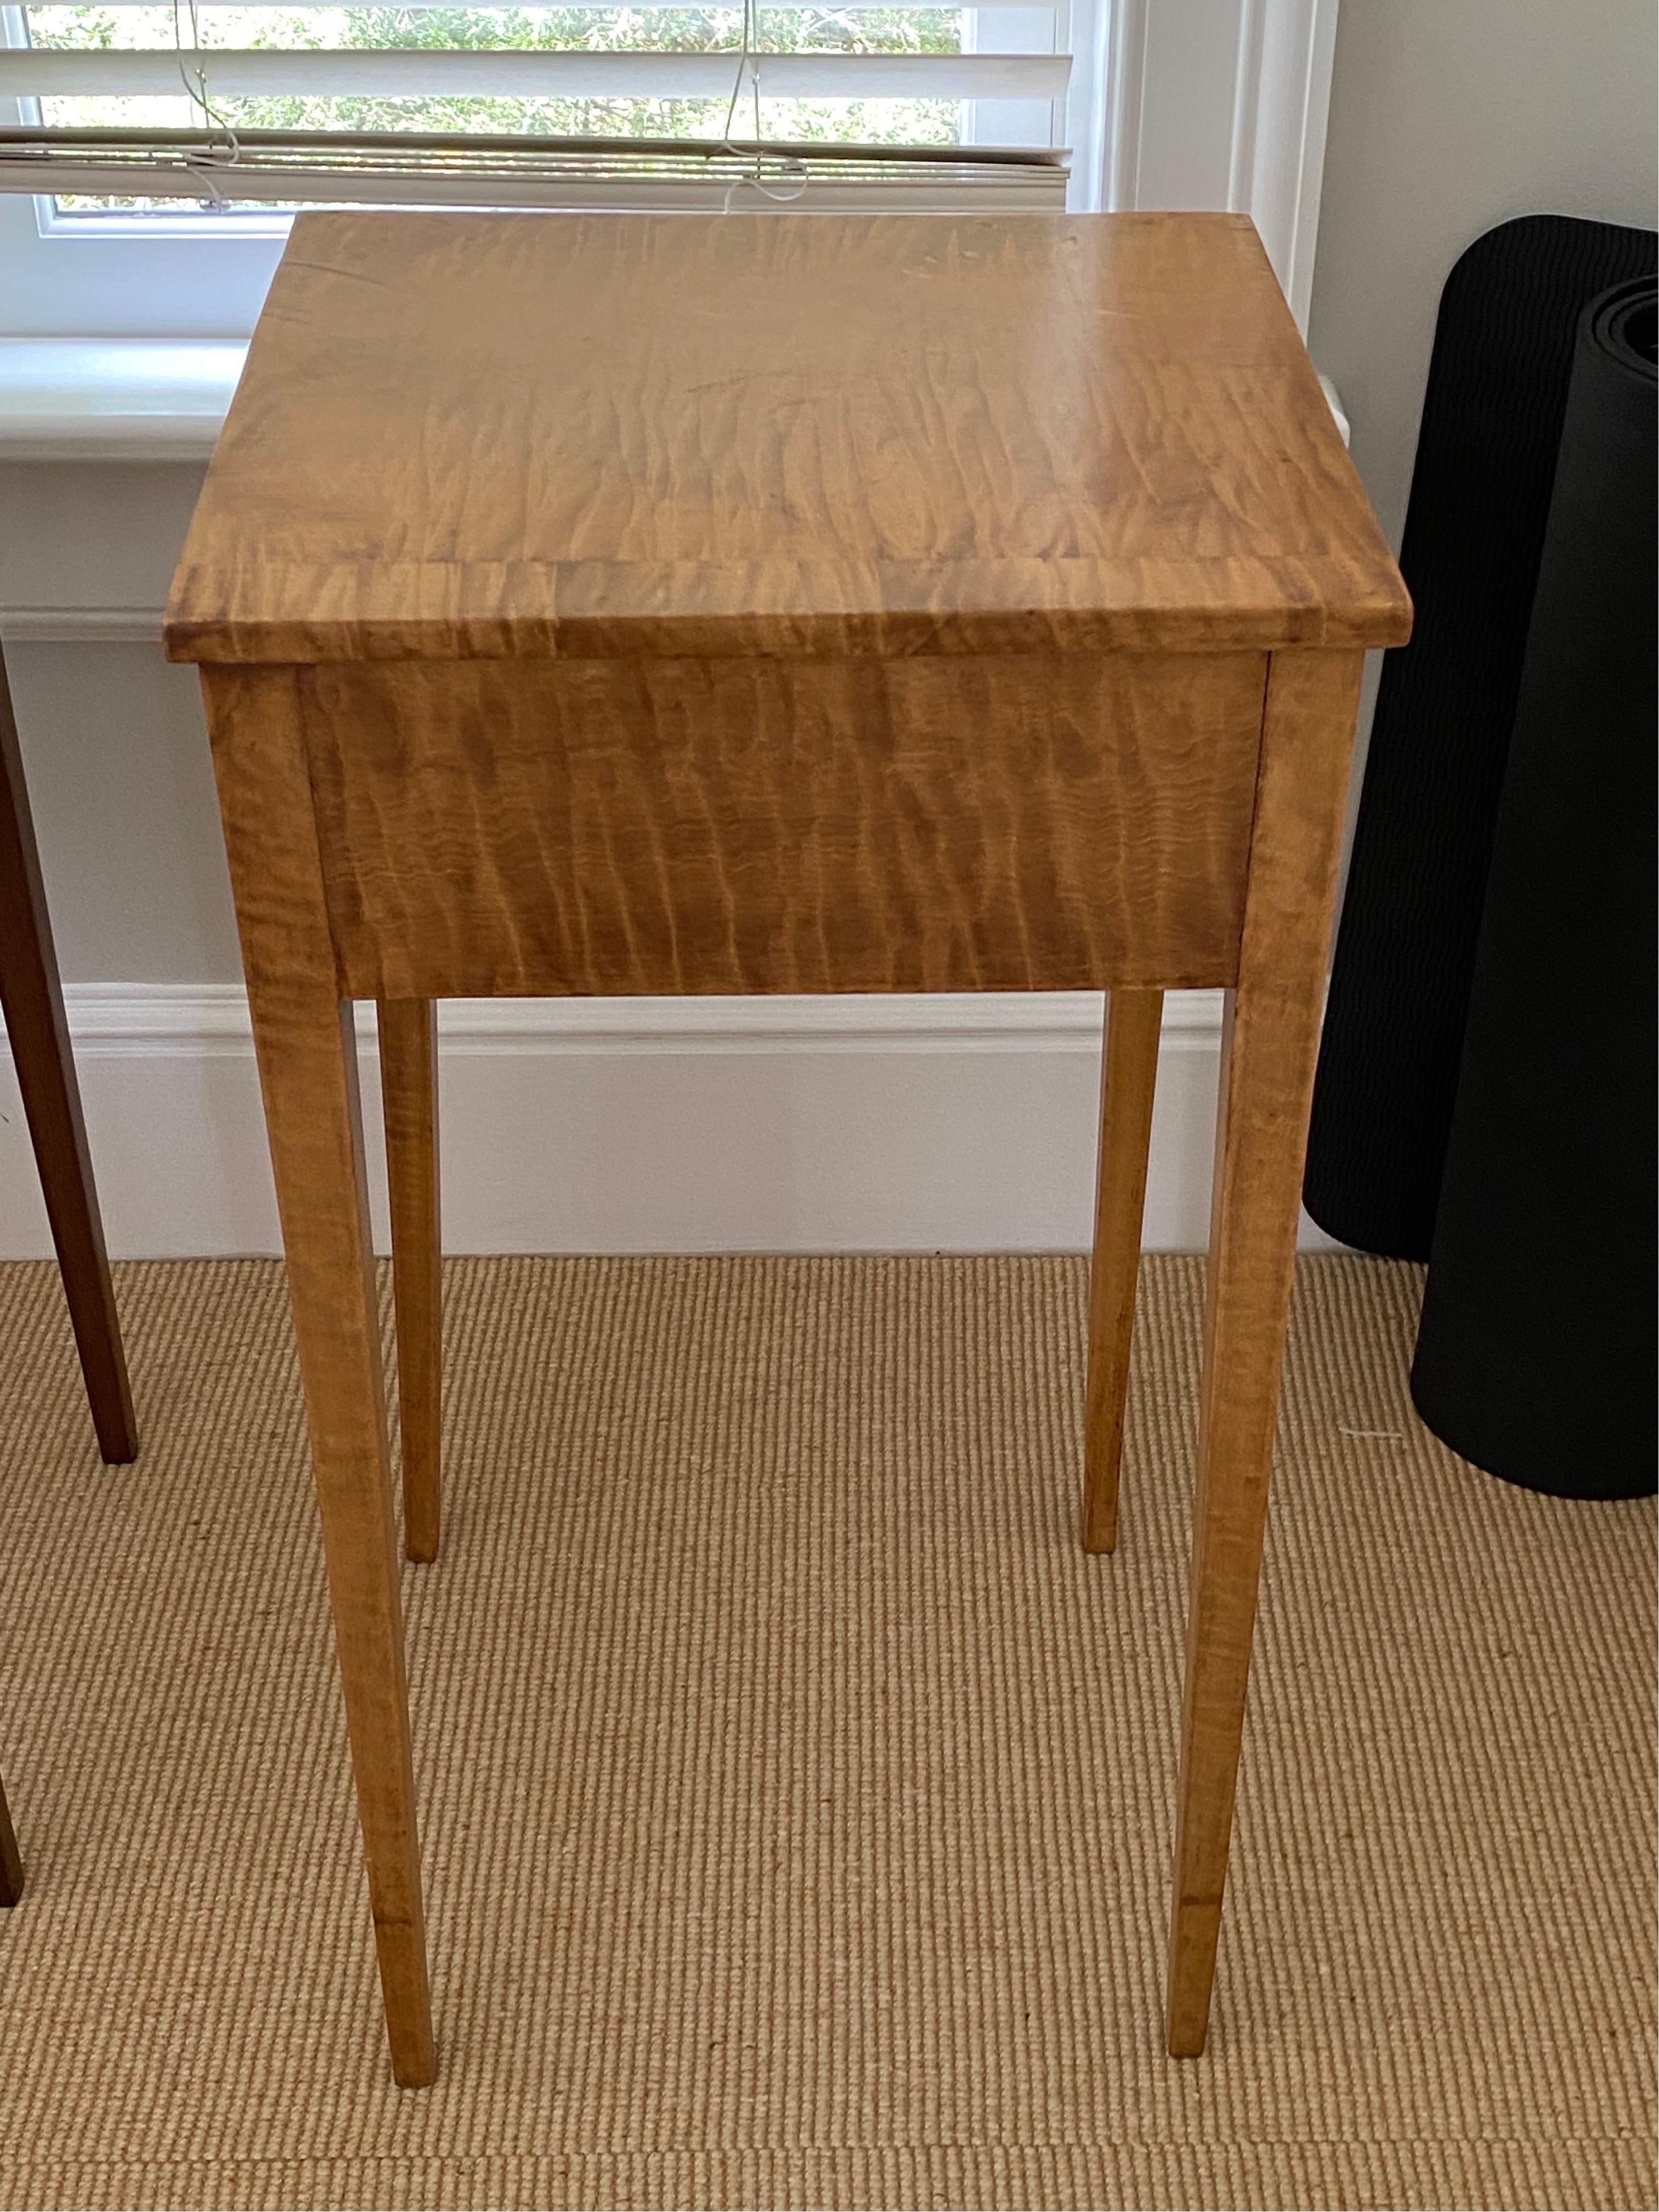 19th Century American Sheraton Tiger Maple Single Drawer Stand with Glass Knobs For Sale 6